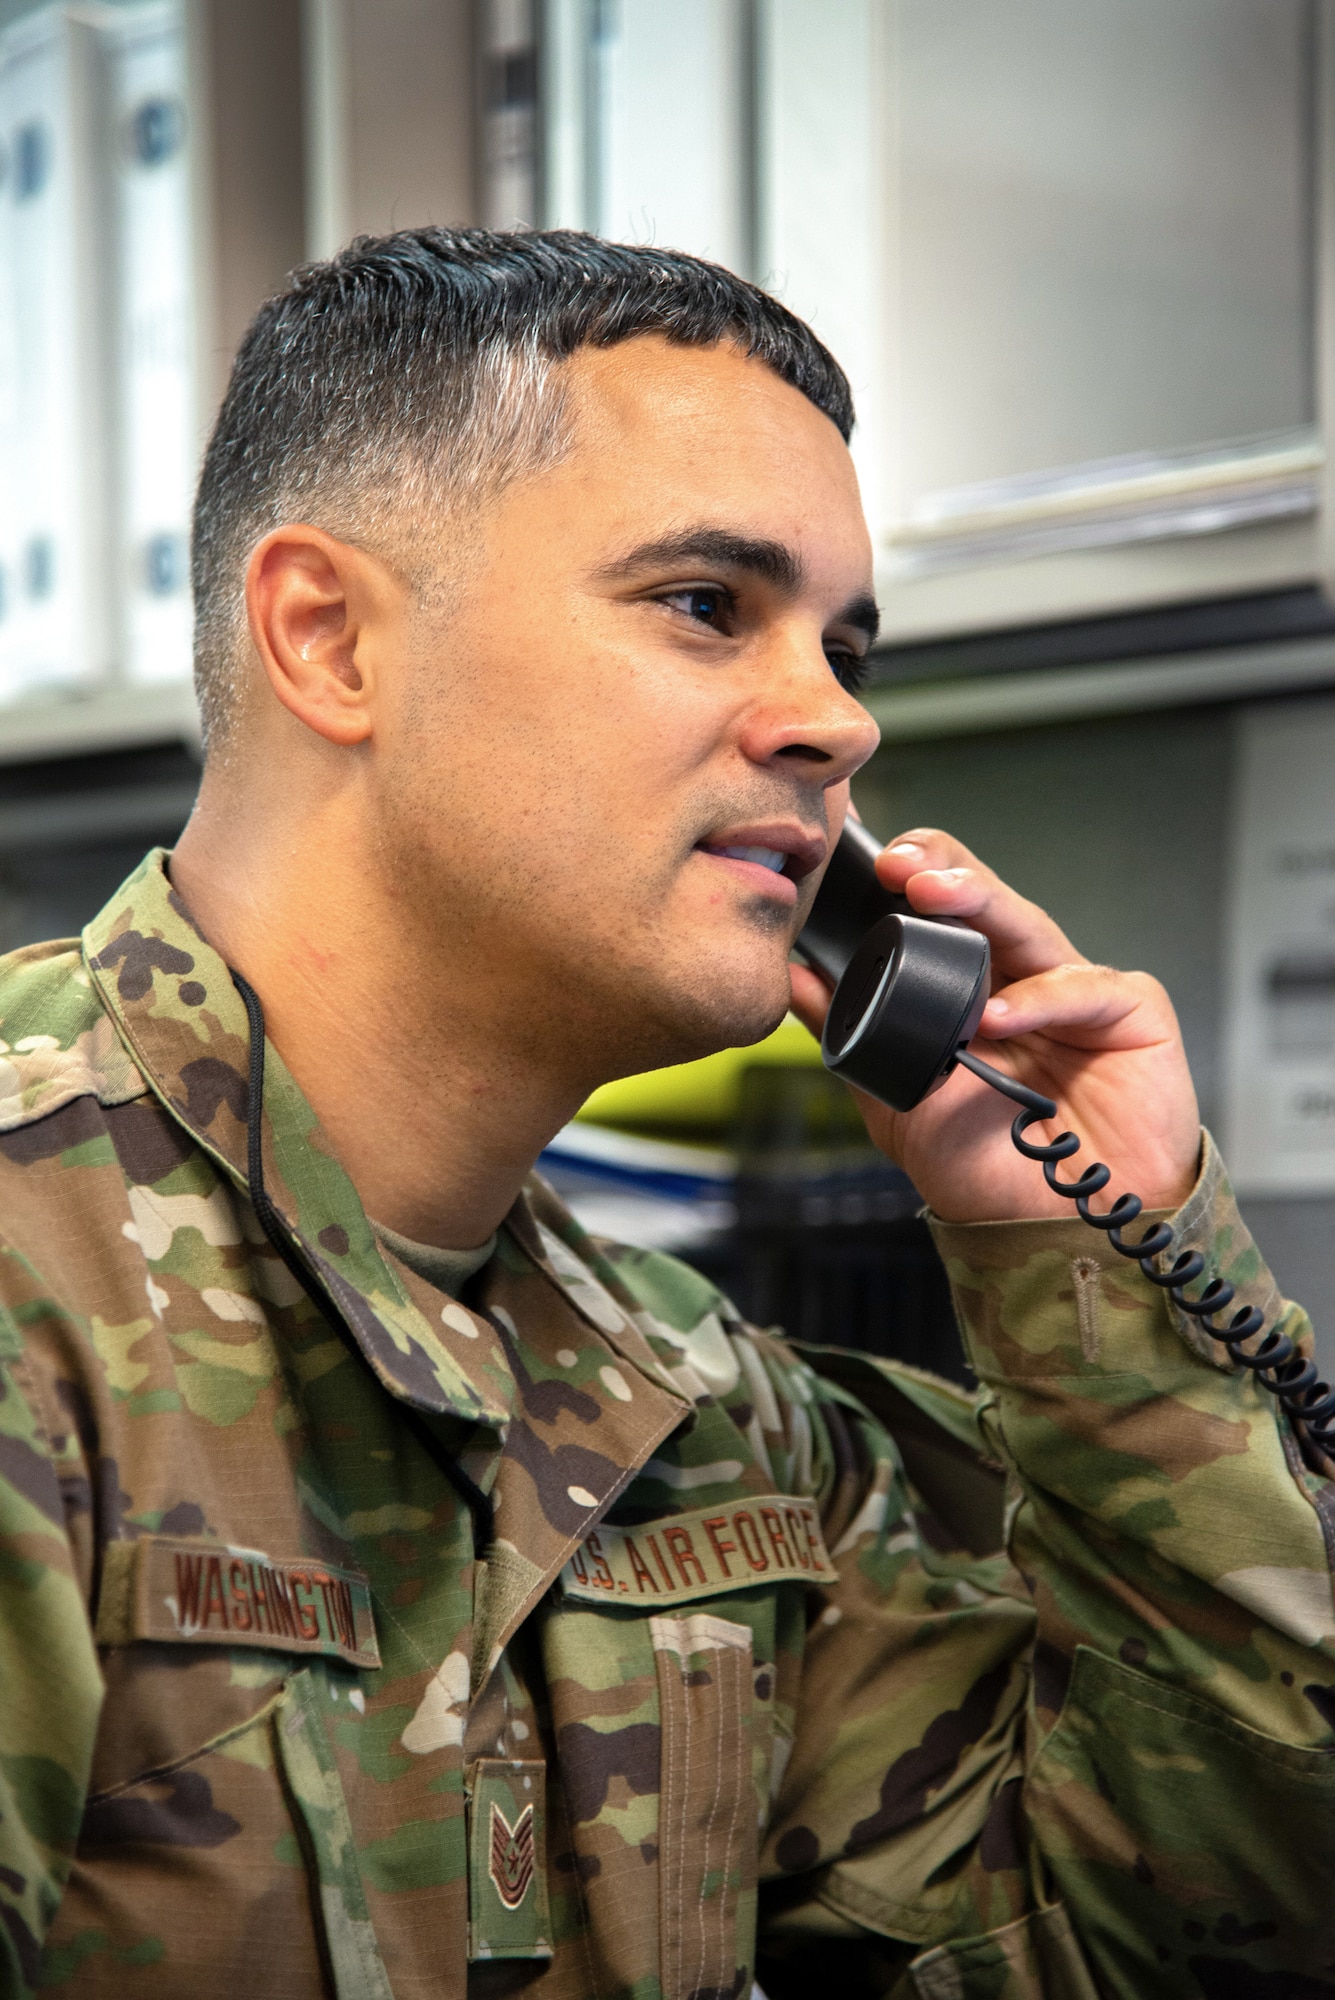 A photo of Tech. Sgt. Timothy A. Washington speaking with a coworker on the phone.